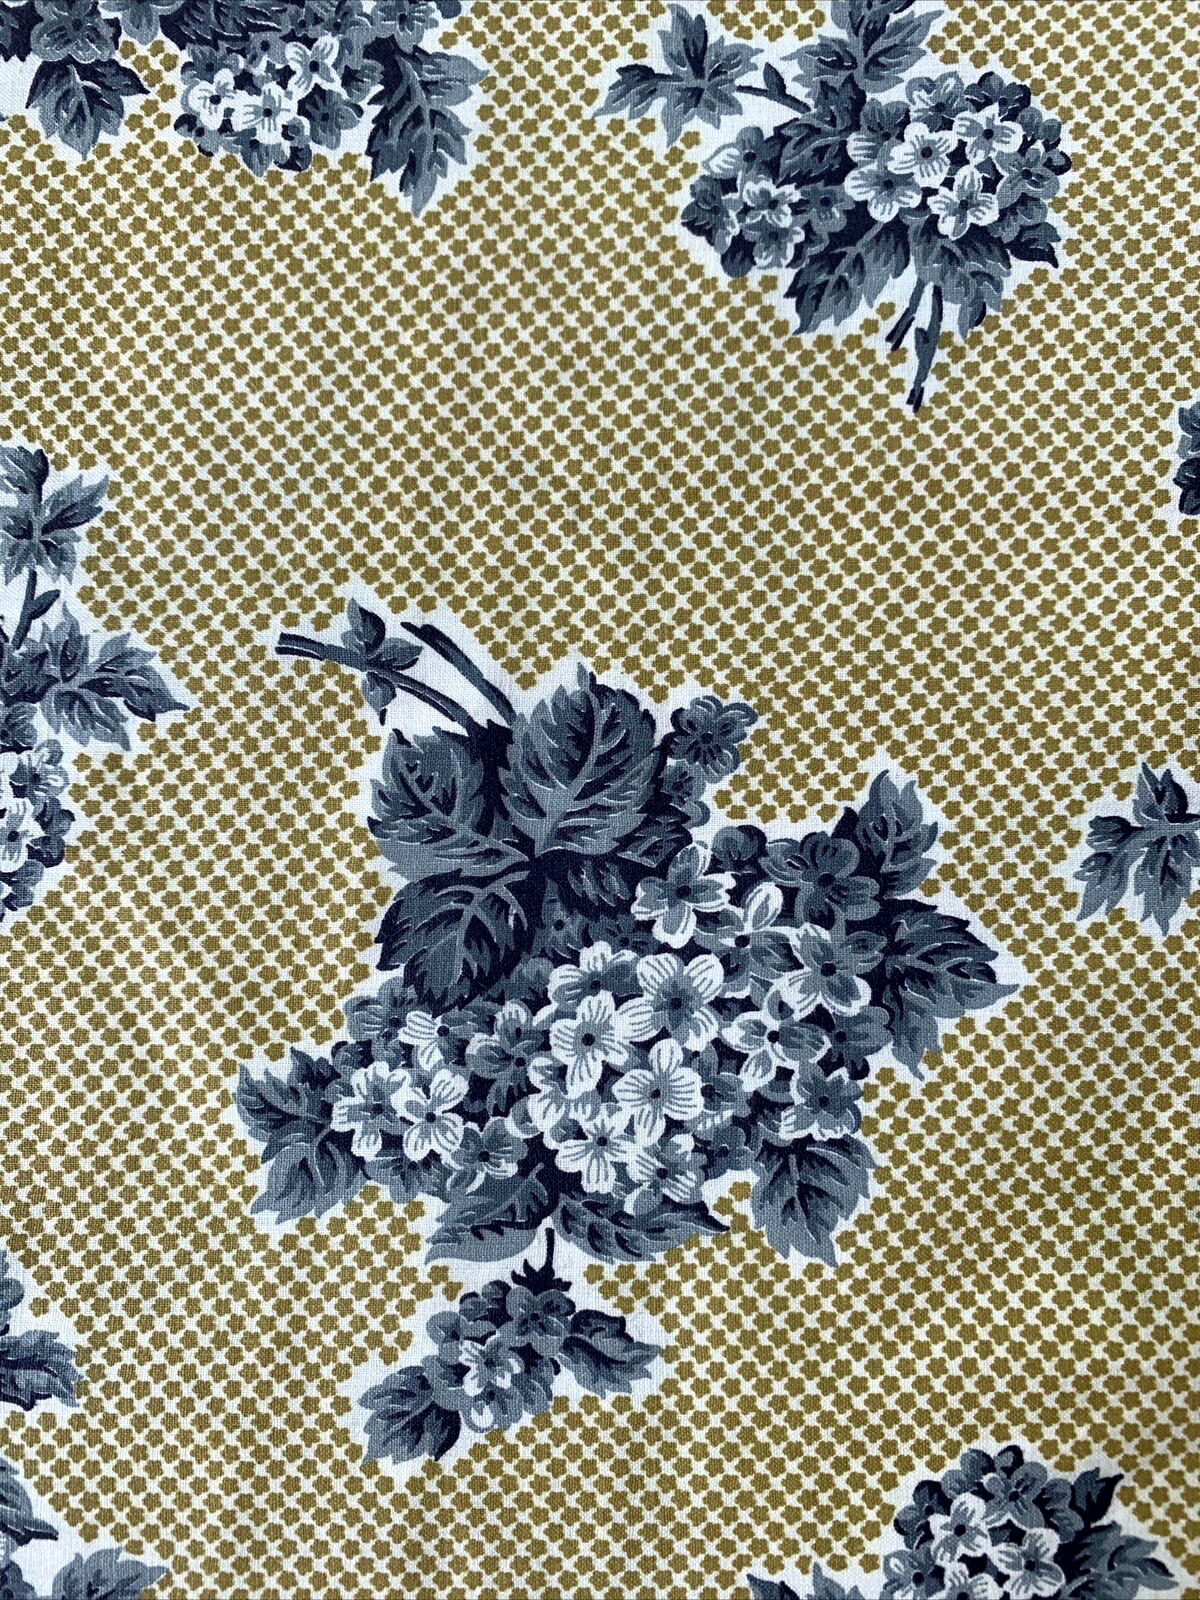 NEW Vintage 1940s COTTON Chintz Fabric Gray Flowers Against Gold Check 4.5 yds